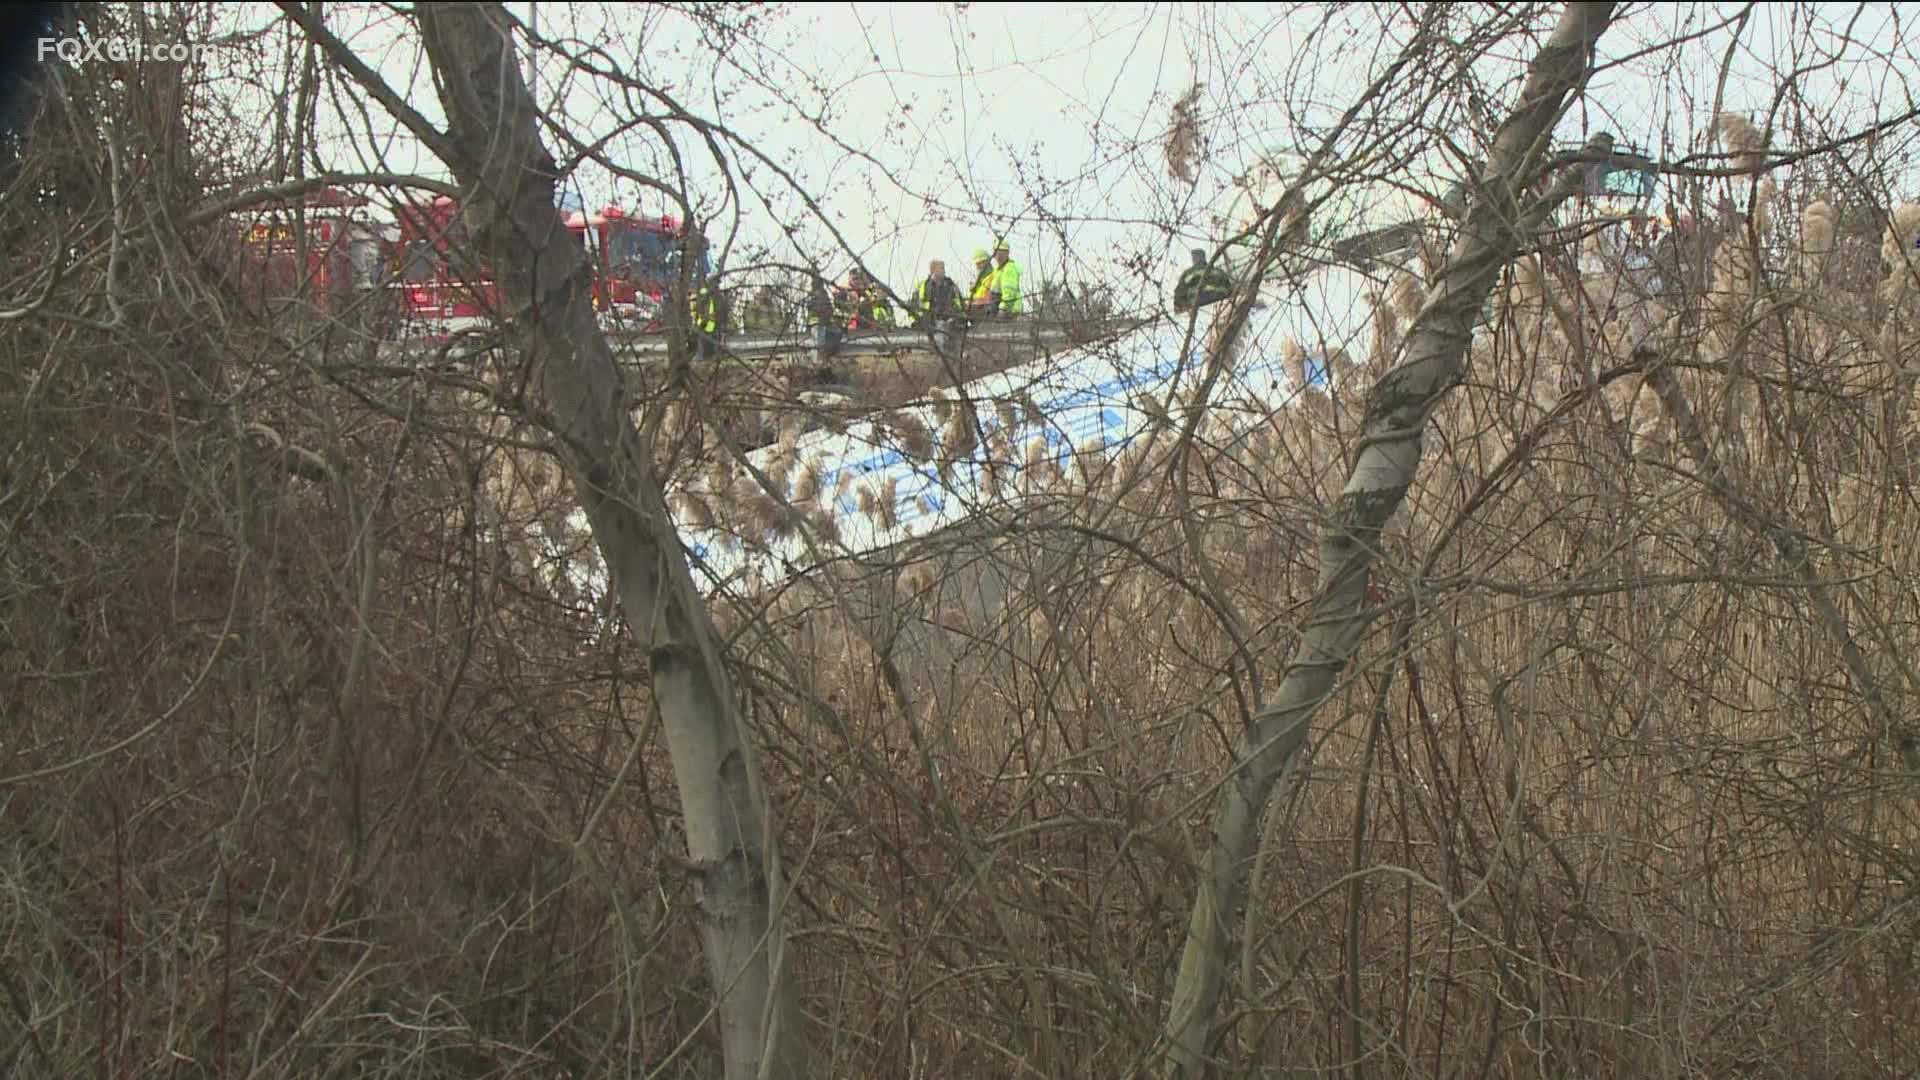 A tractor-trailer is down an embankment off of I-91 in Enfield. No injuries have been reported yet.